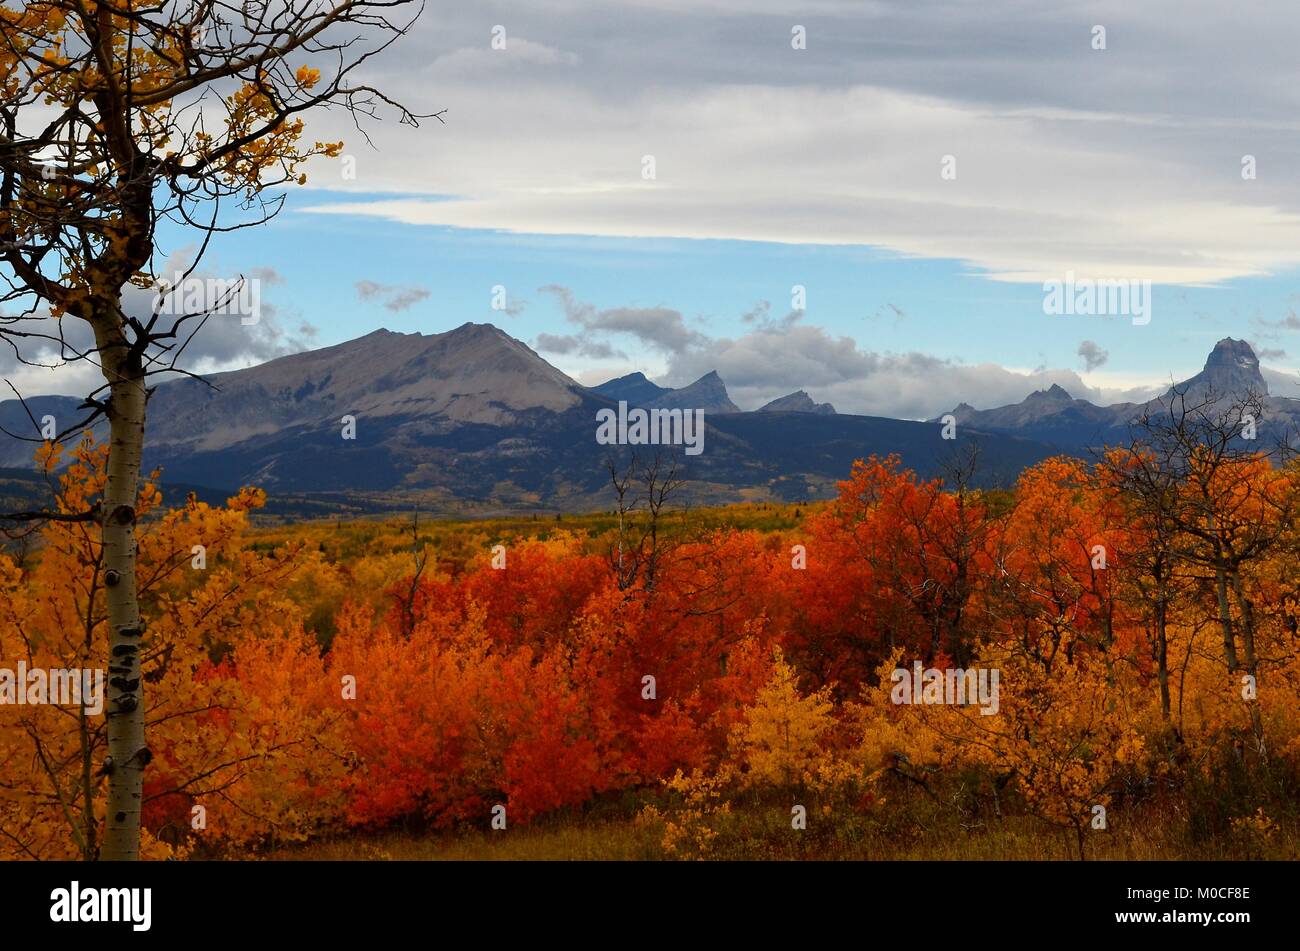 Autumn in the mountains, with Chief mountain in the distance and an amazing arrangement of fall colors scattering over the landscape Stock Photo